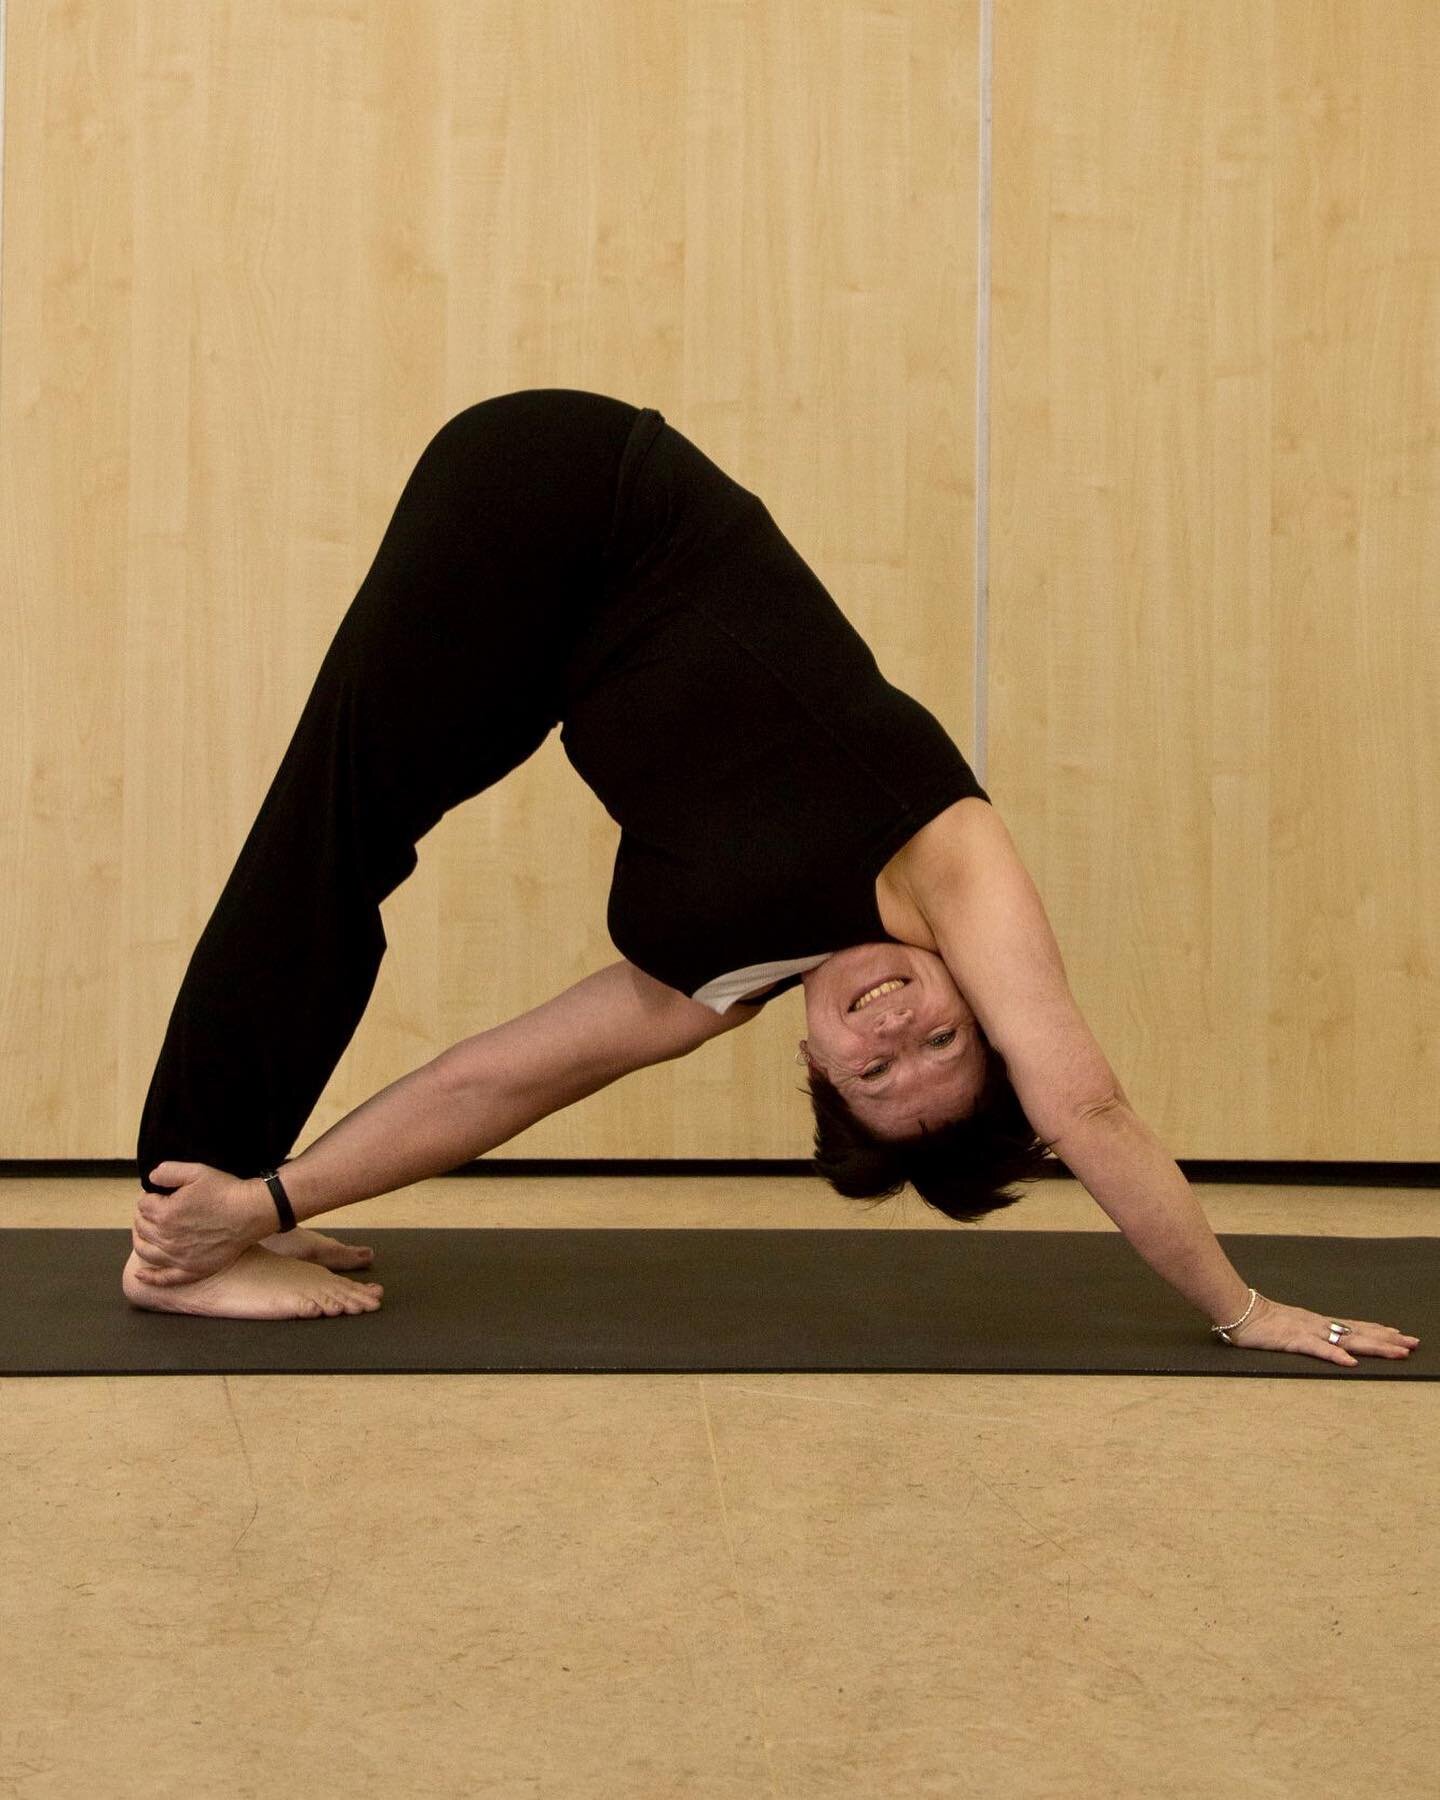 Over time our yoga practice can help us to broaden our perspective.

We may begin by focusing all of our attention and effort on physically turning ourselves upside down, standing on one leg, stretching and strengthening our body or reminding ourselv